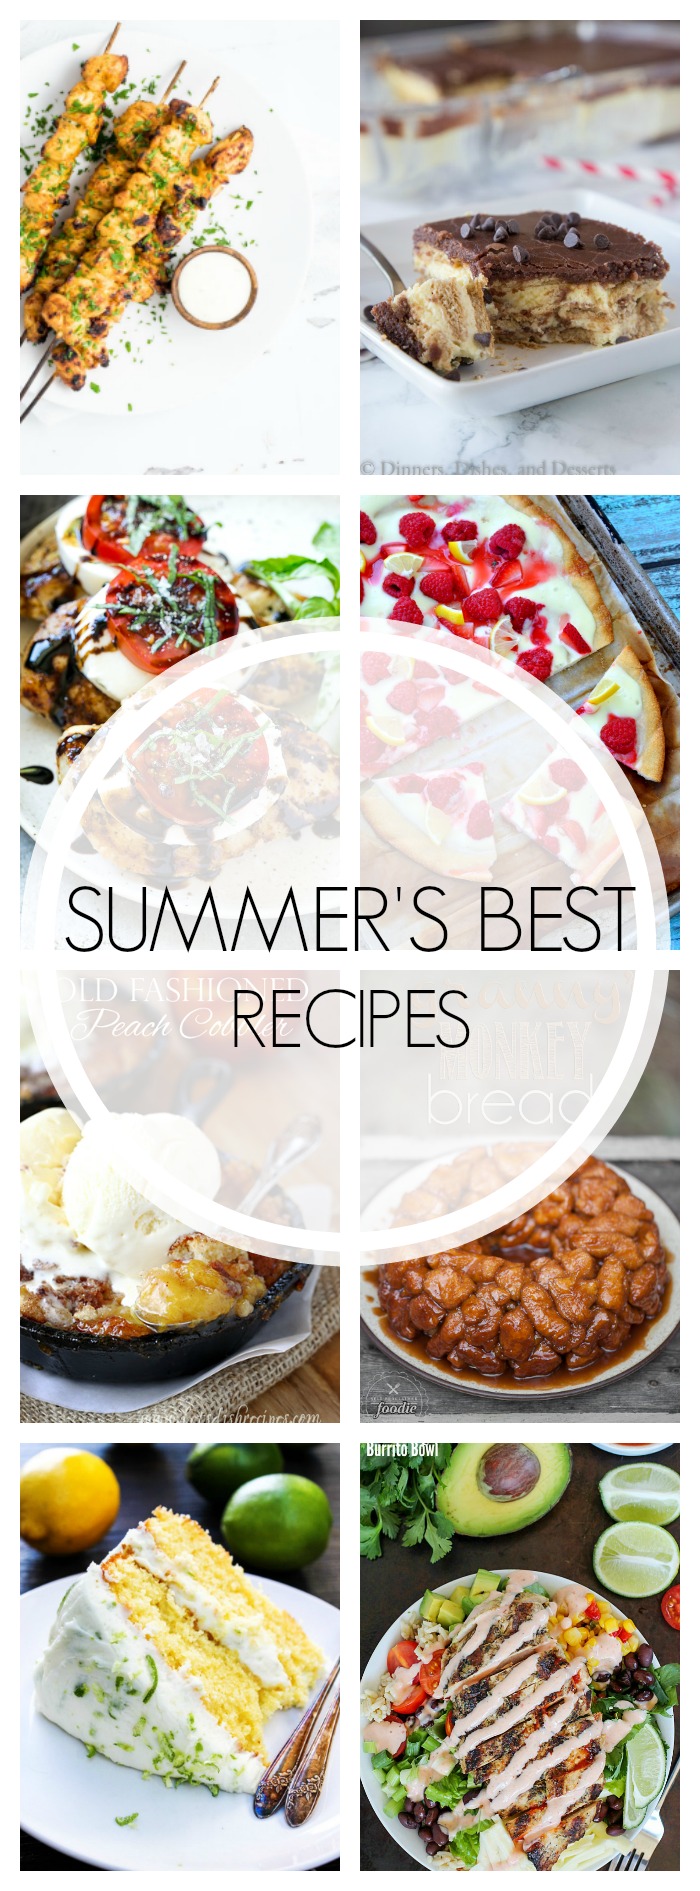 As we transition from summer into fall, let's look back on all of the recipes that made summer great! Here are 20 of the best summer recipes!